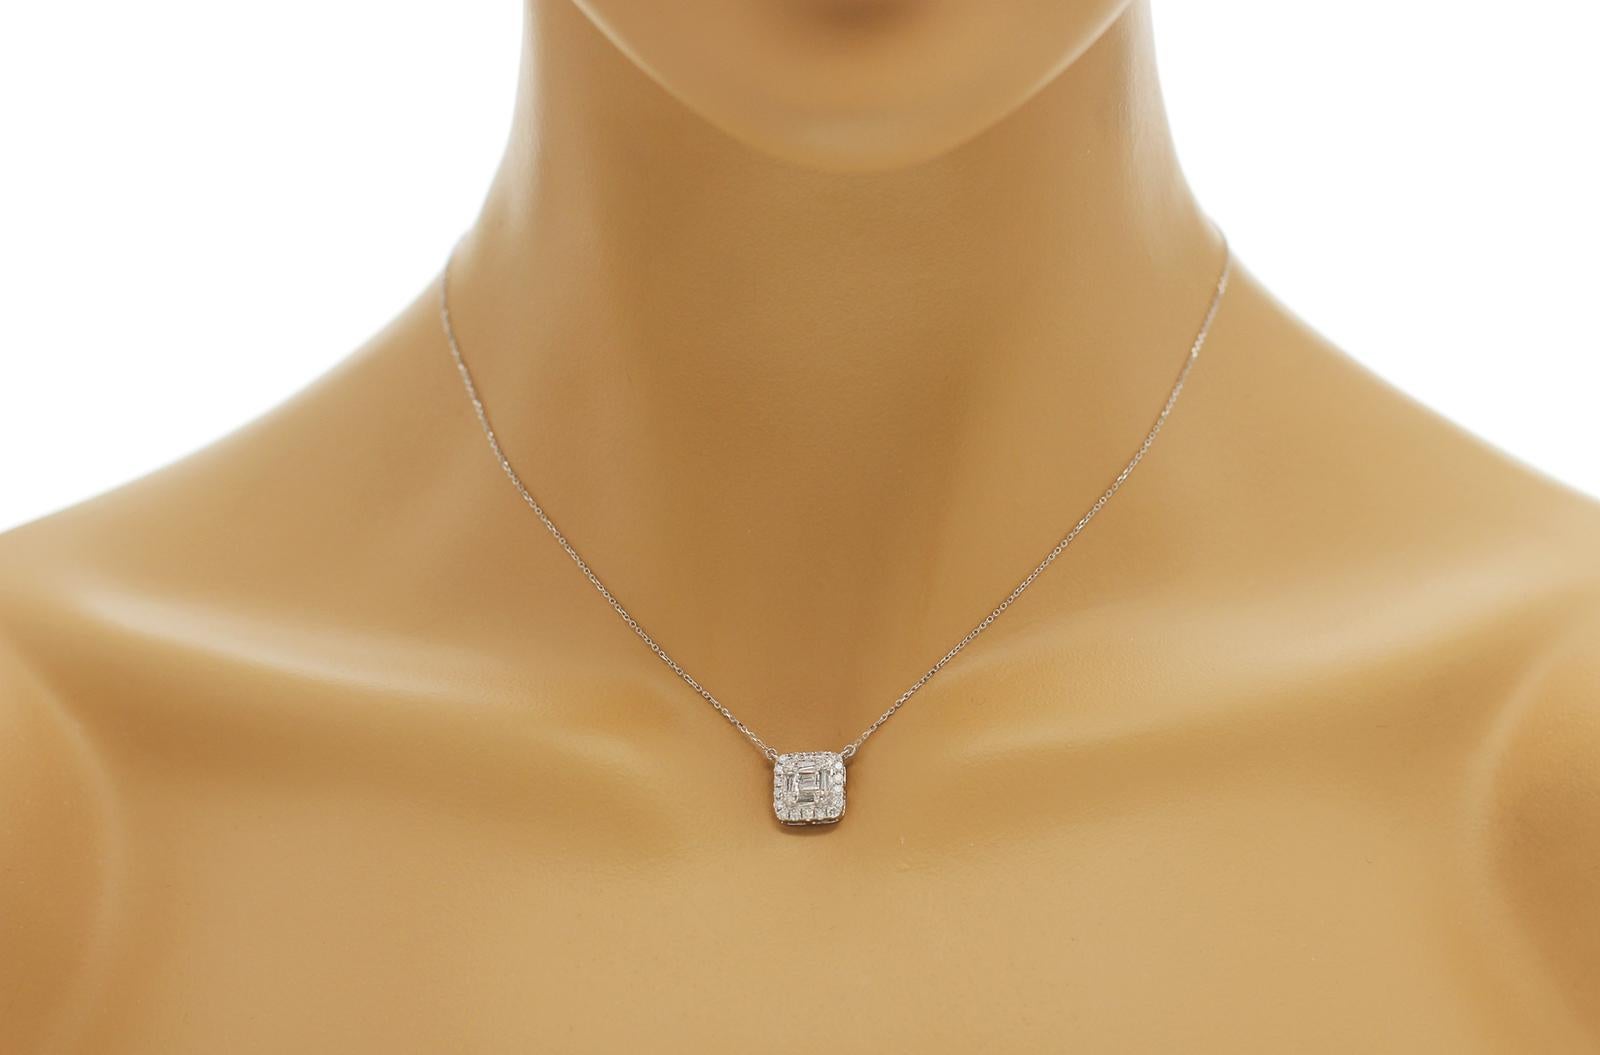 100% Authentic, 100% Customer Satisfaction

Pendant: 11 mm

Chain: 0.3 mm

Size:18 Inches

Metal: 14K White Gold

Hallmarks: 14K

Total Weight: 2.5 Grams

Stone Type:   Diamond 0.75 CT  G-H   VS-SI1

Condition: New With Tag 